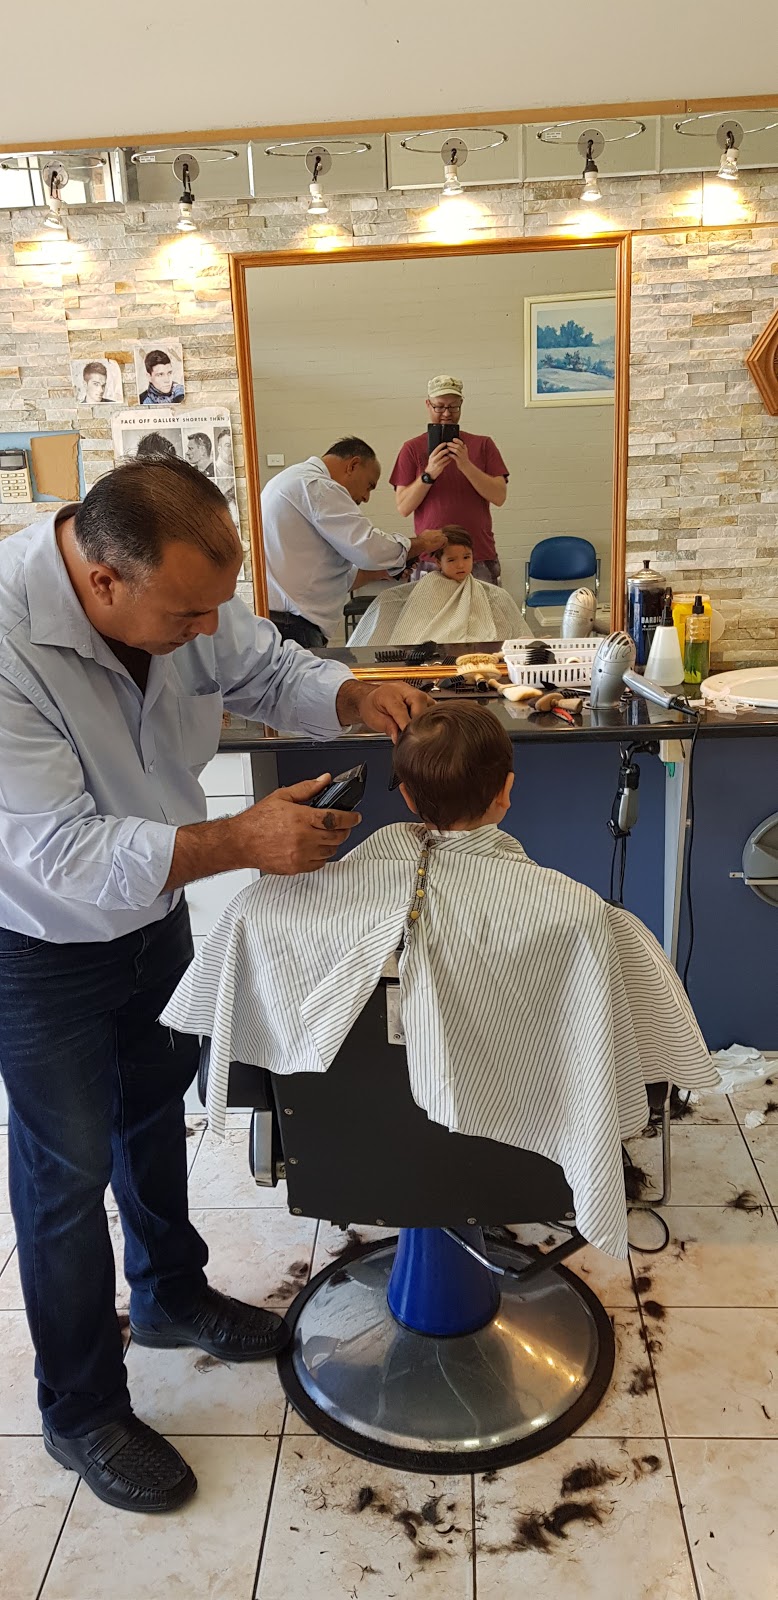 Rooty Hill Barber | hair care | 32A Rooty Hill Rd N, Rooty Hill NSW 2766, Australia | 0402171117 OR +61 402 171 117